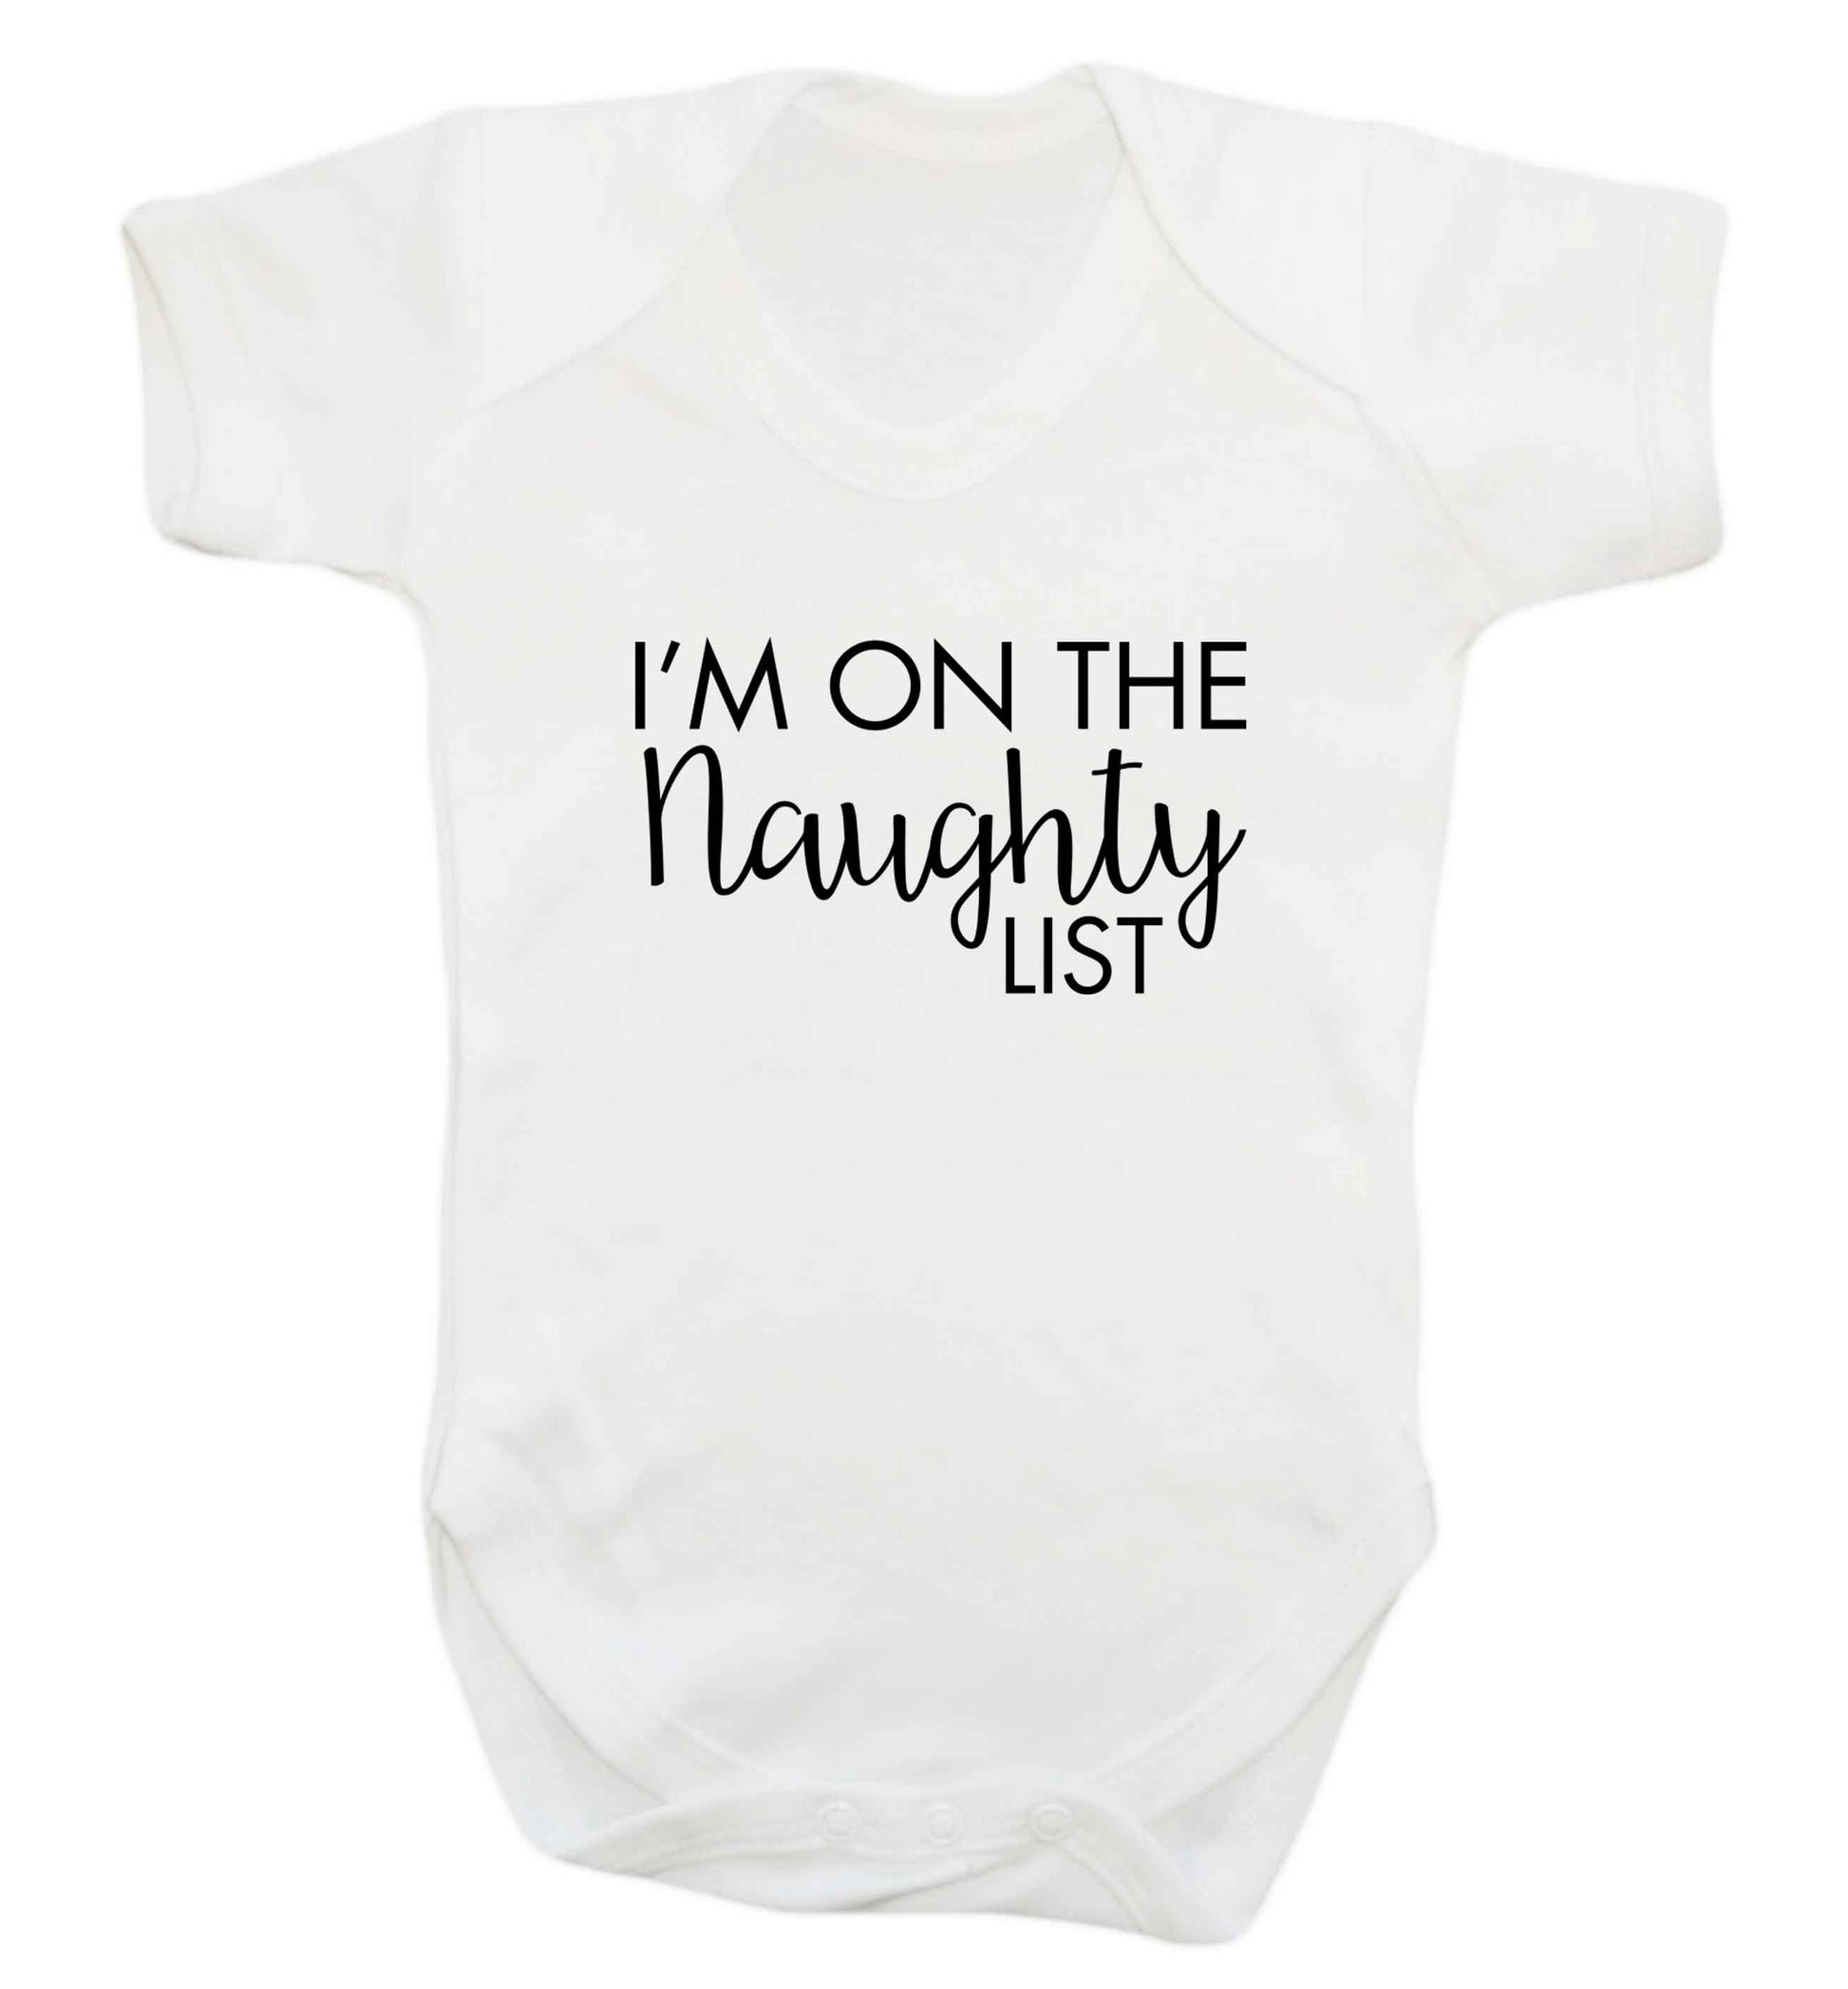 I'm on the naughty list baby vest white 18-24 months